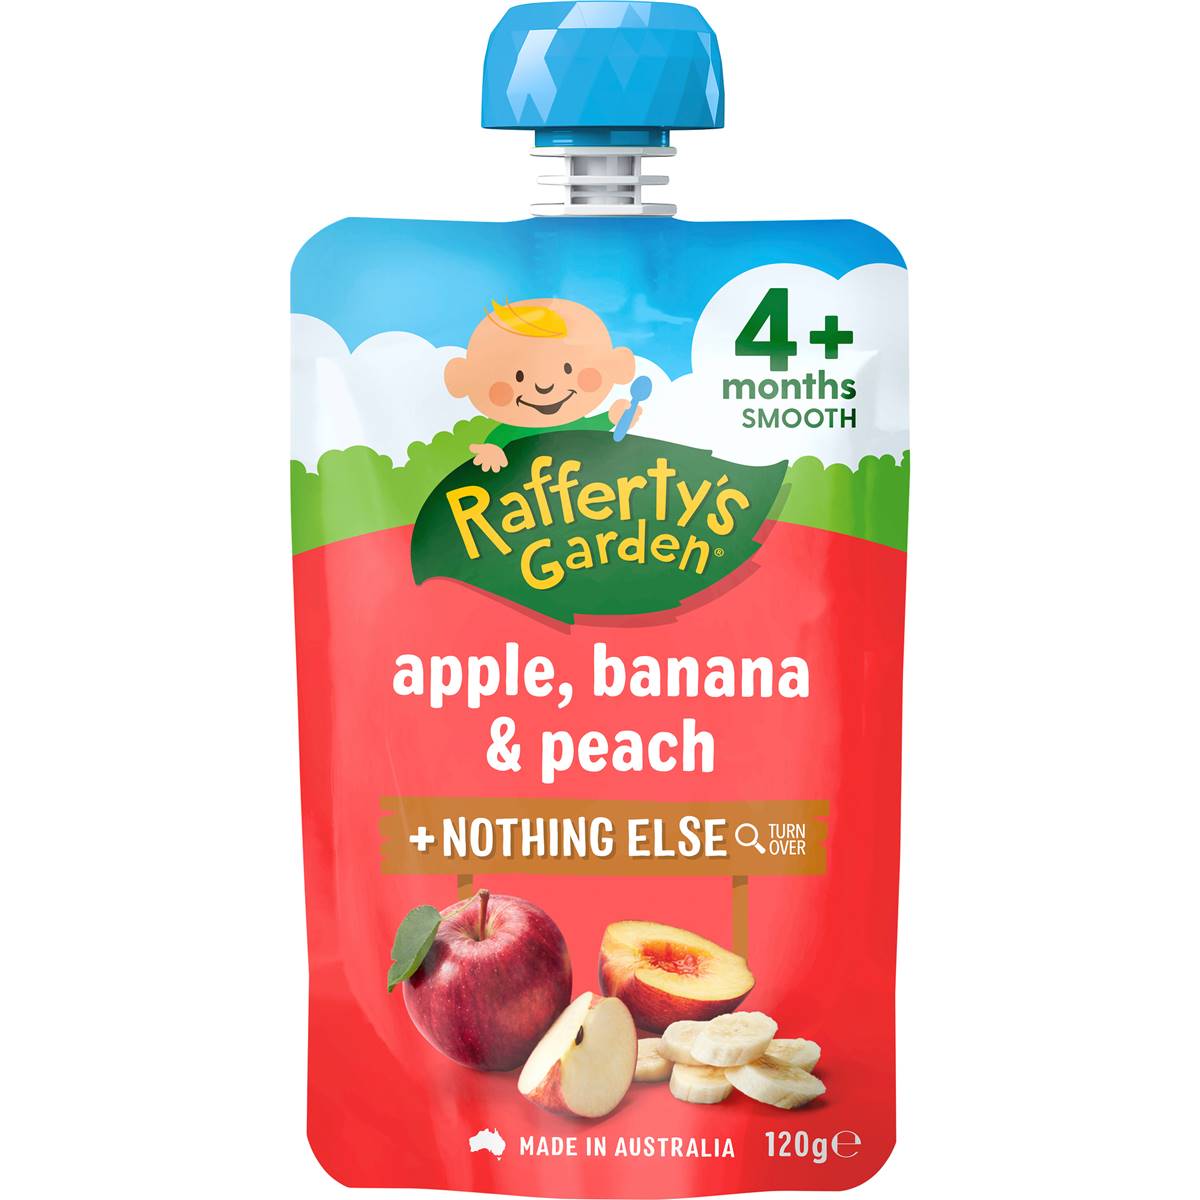 Calories in Rafferty's Garden Baby Food Pouch Apple, Banana & Peach Nothing Else 4+ Months